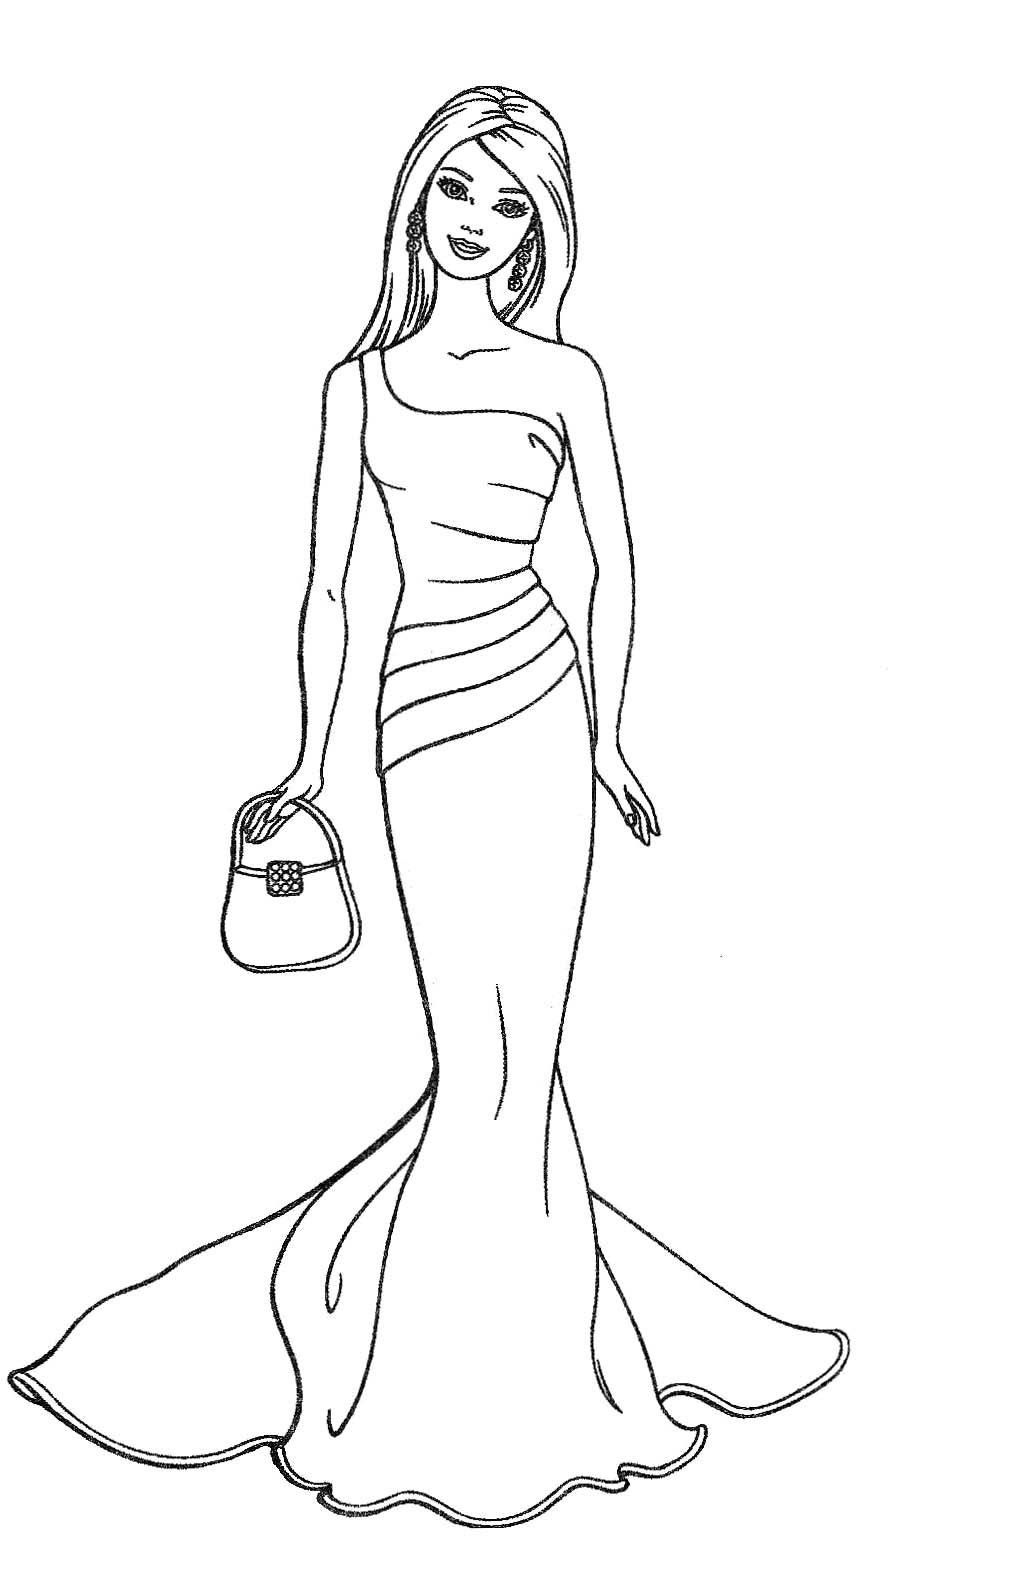 Coloring Pages Of Barbie
 Barbie Coloring Pages Printable To Download